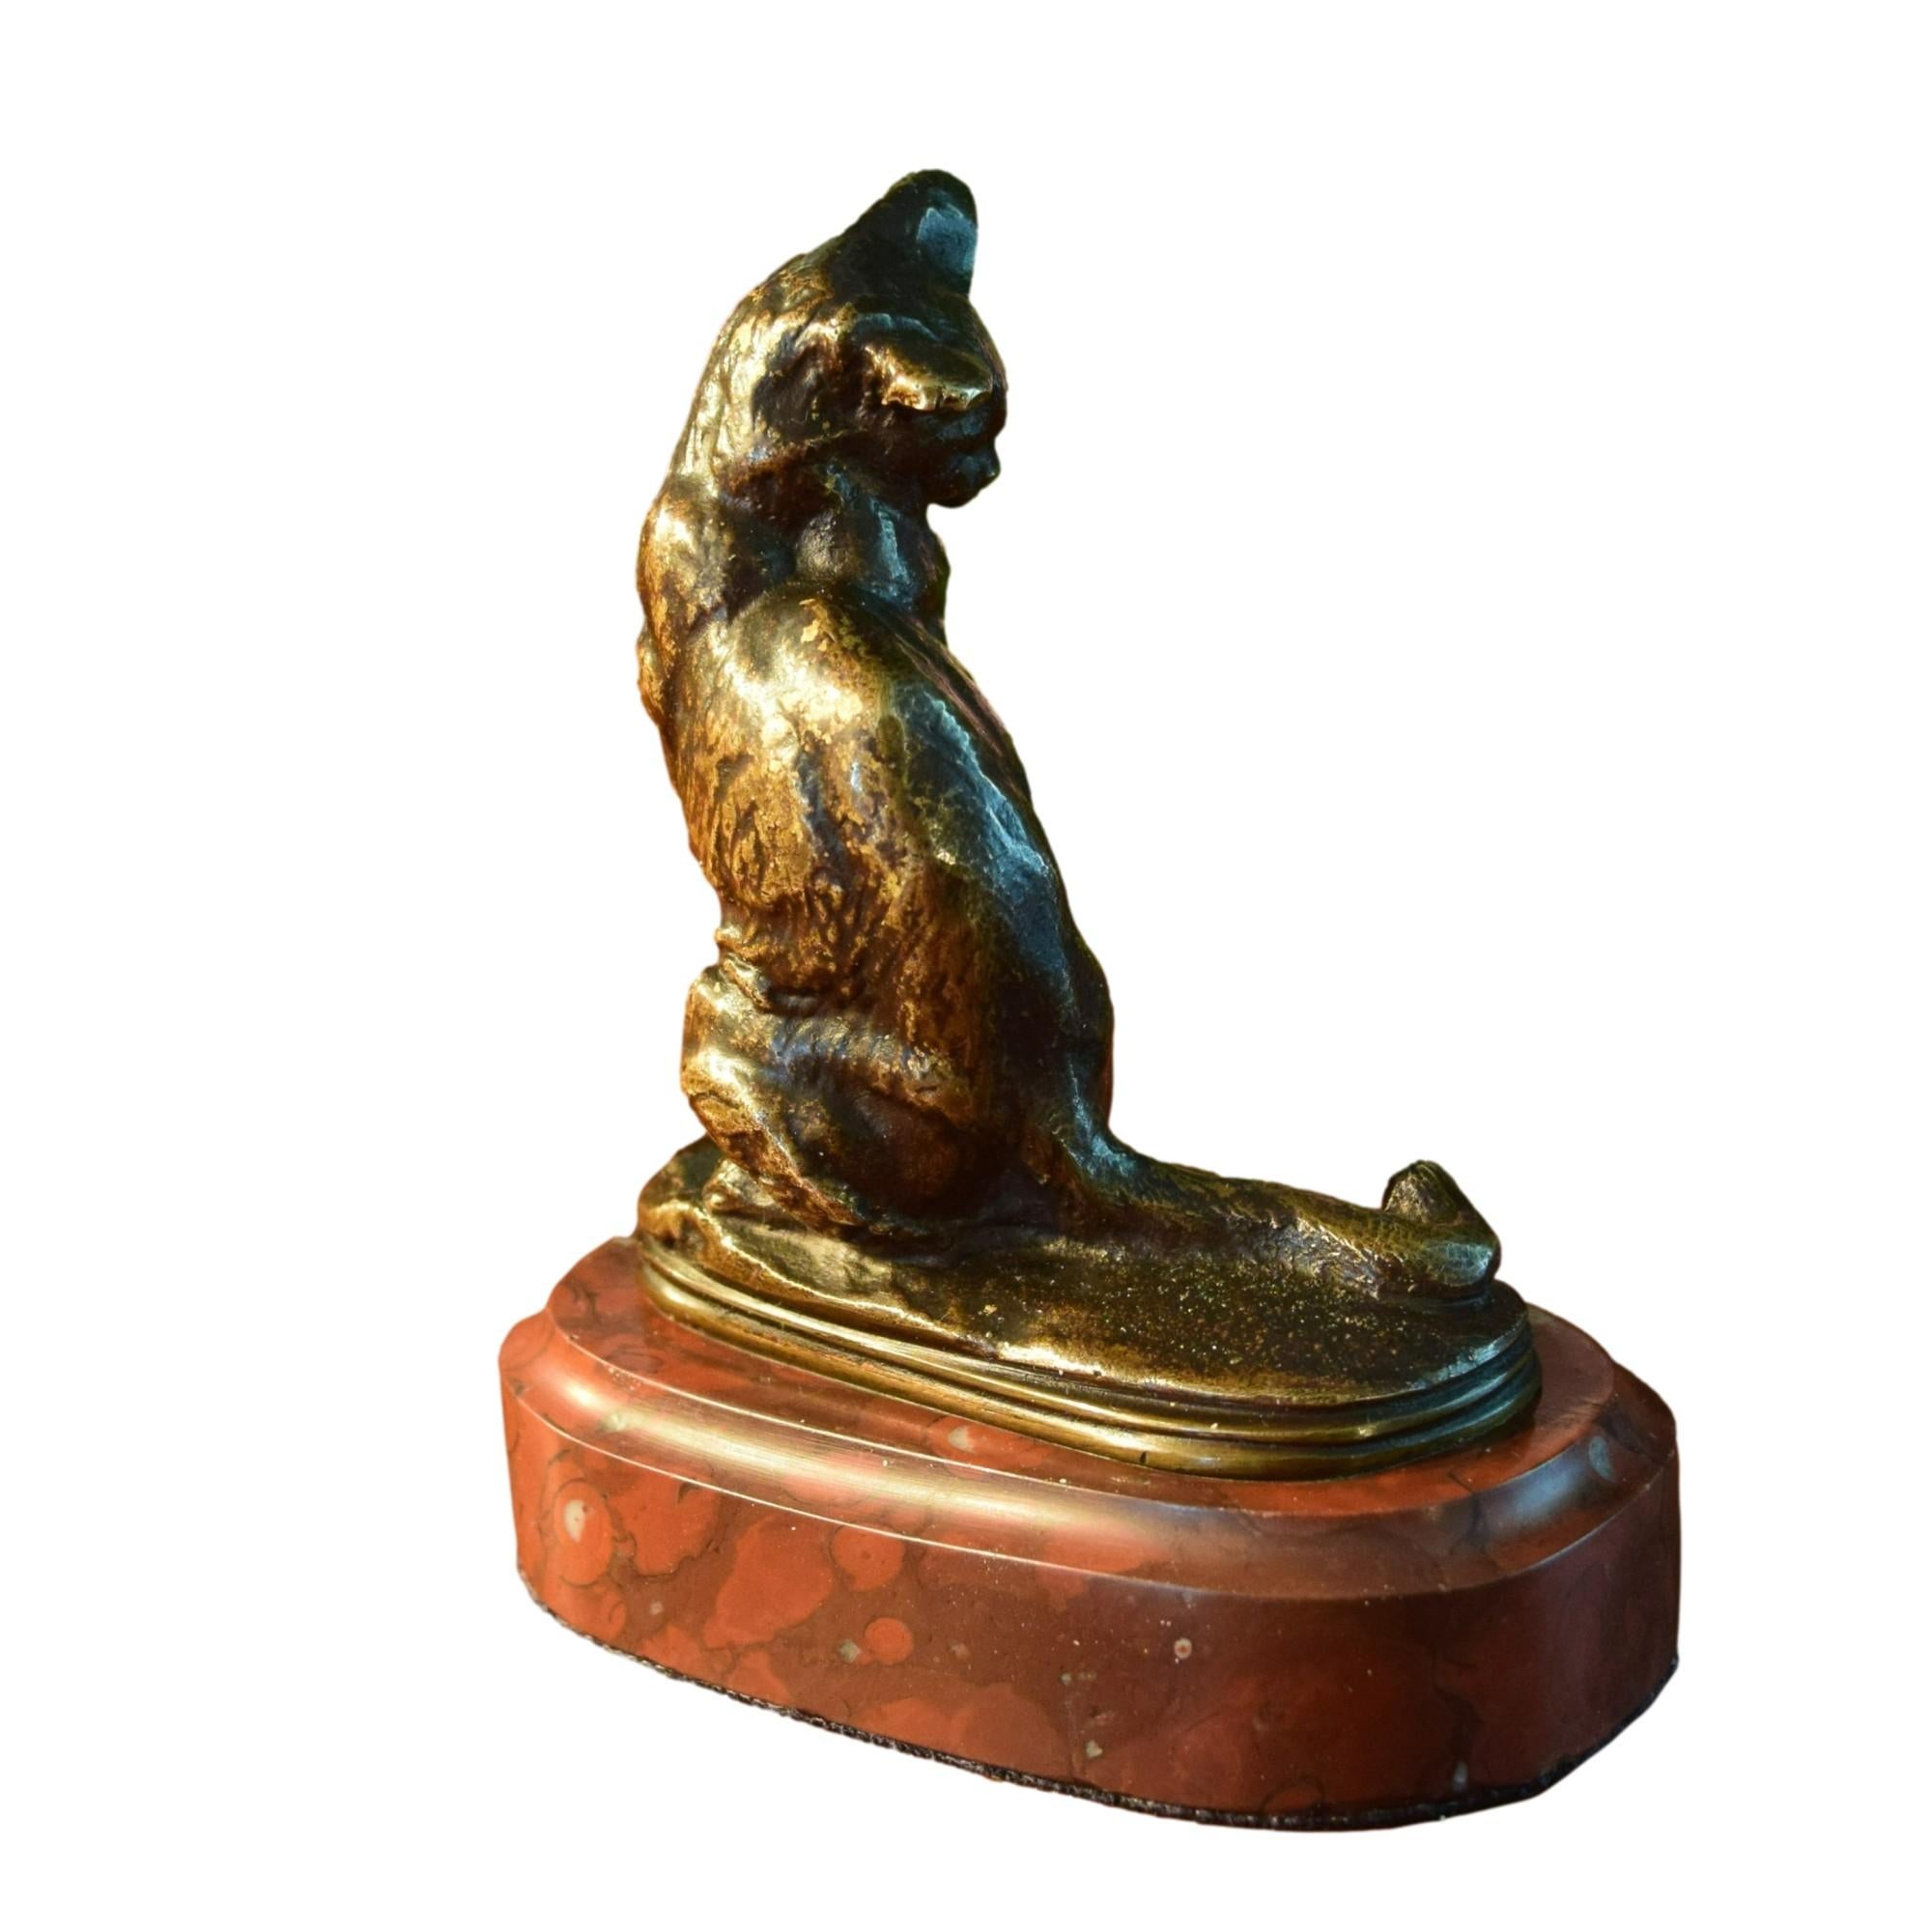 

Lovely Seated Bronze Cat Statue by Emmanuel Frémiet as French Sculptor French, born in 1824.
Highlighted by a brown patina the sculpture is charming, capturing perfectly the attitude of the little feline.

Frémiet was born in Paris, he was